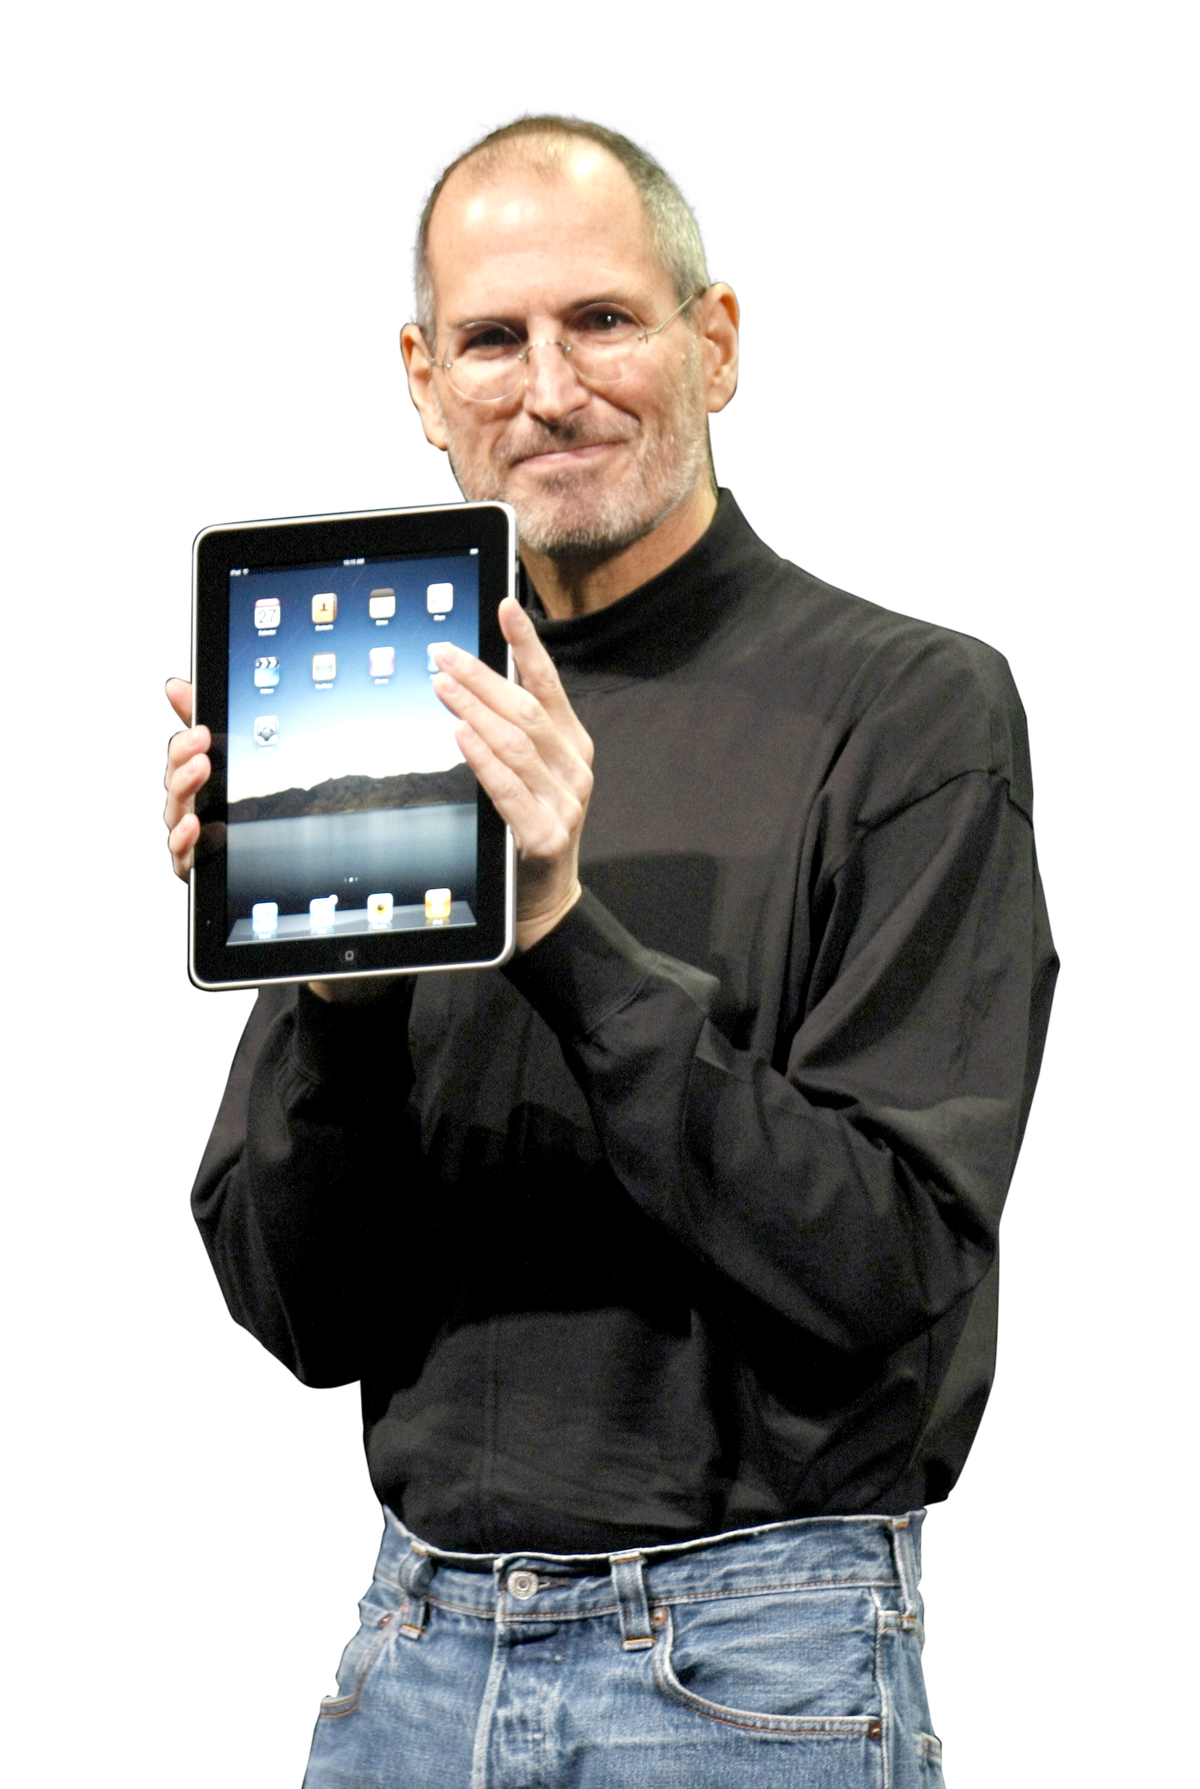 FILE – In this Jan. 27, 2010 file photo, Apple CEO Steve Jobs shows off the new iPad during an Apple event in San Francisco. Apple has become the world’s first company to be valued at $1 trillion, the financial fruit of tasteful technology that has redefined society since two mavericks named Steve started the company 42 years ago. (AP Photo/Paul Sakuma, File) ORG XMIT: NYDK416  (Paul Sakuma)